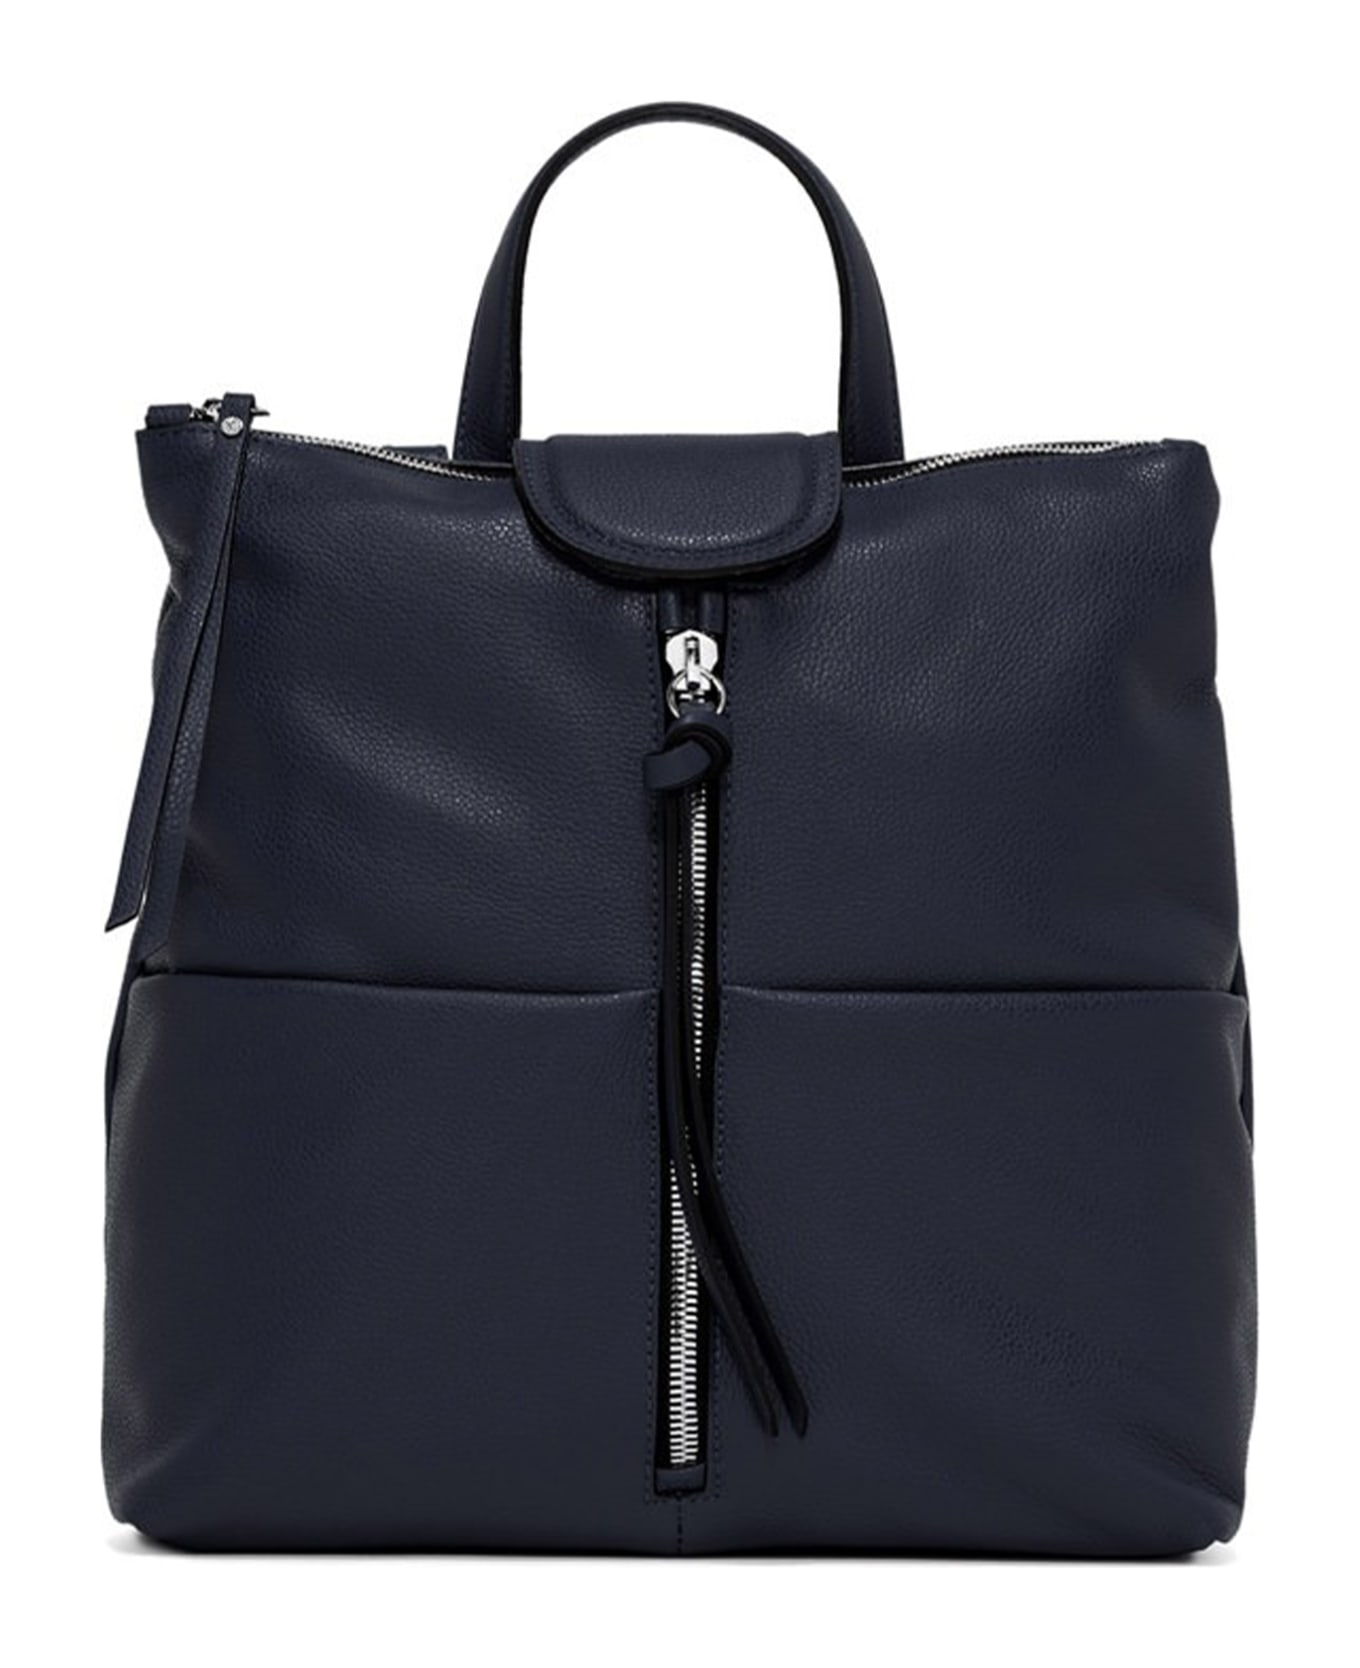 Gianni Chiarini Giada Leather Backpack With Front Zip - NAVY